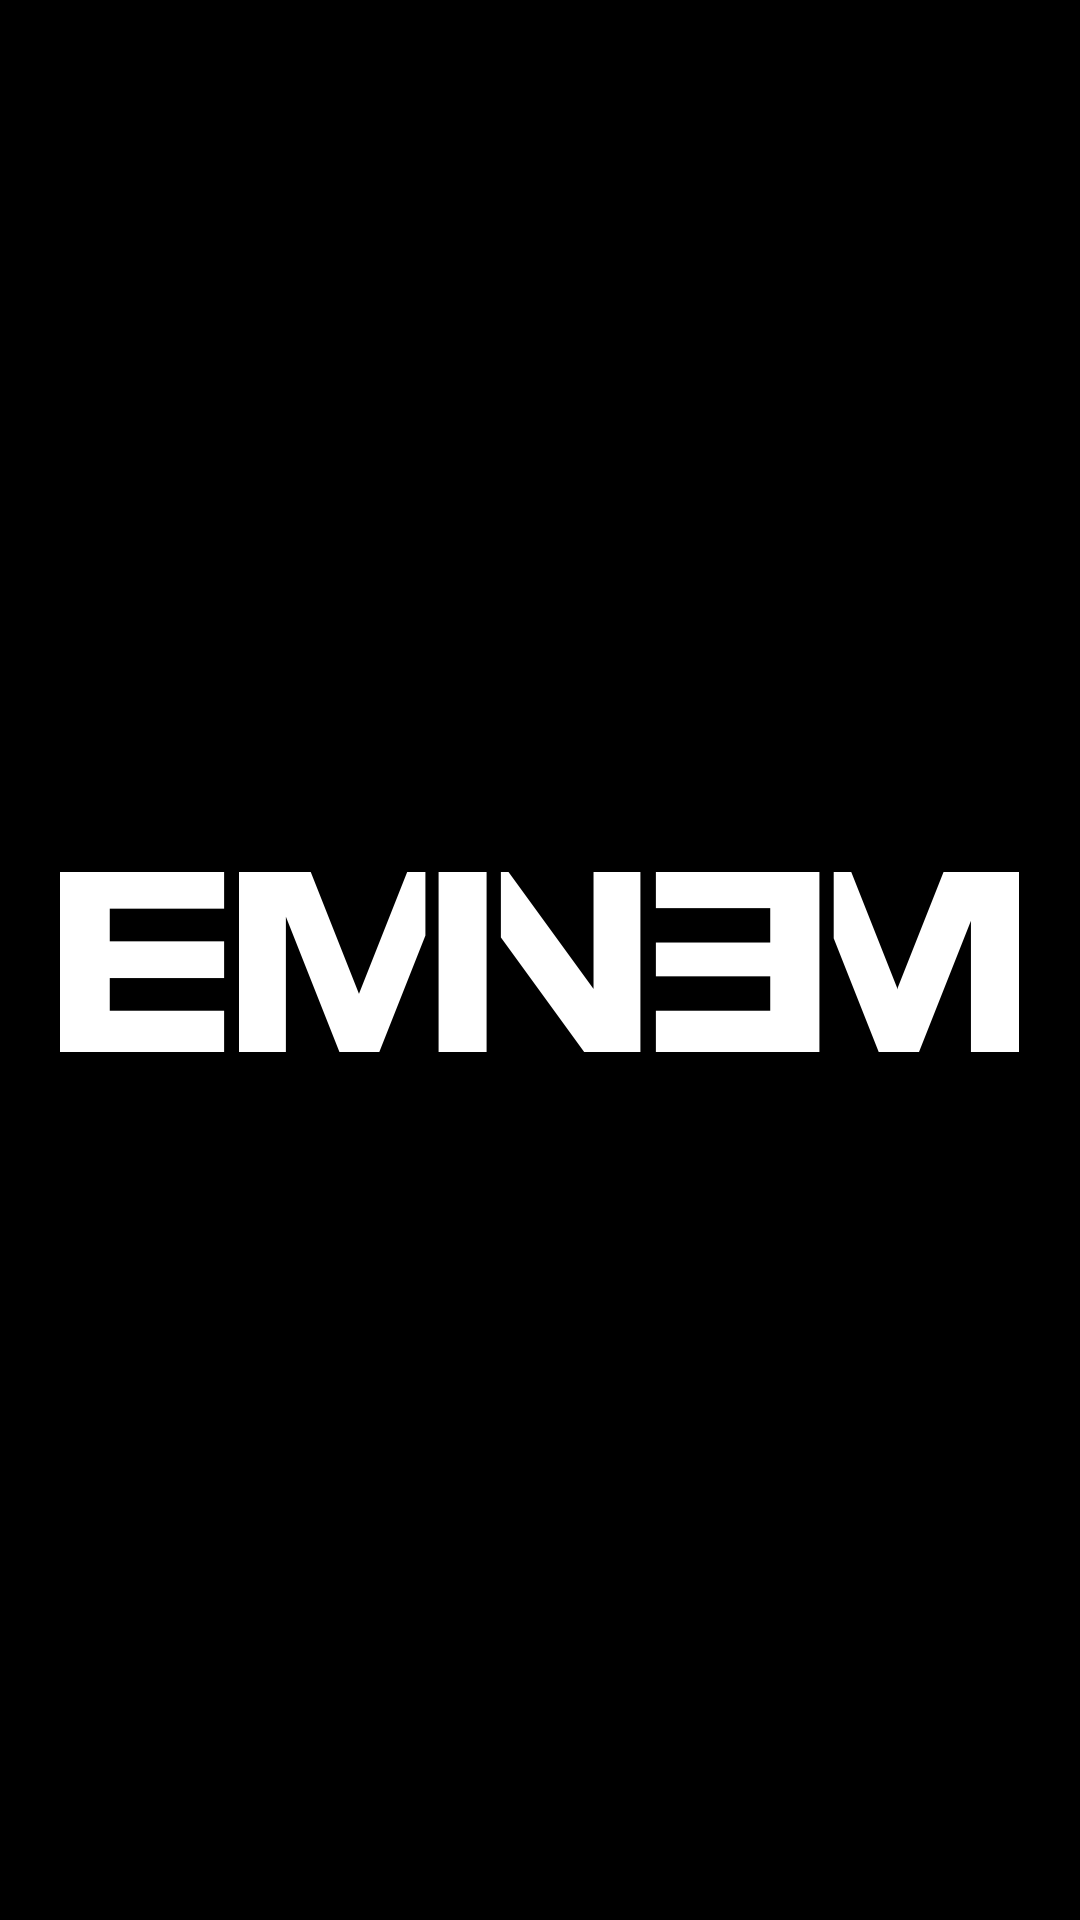 Any good iphone wallpapers? : Eminem